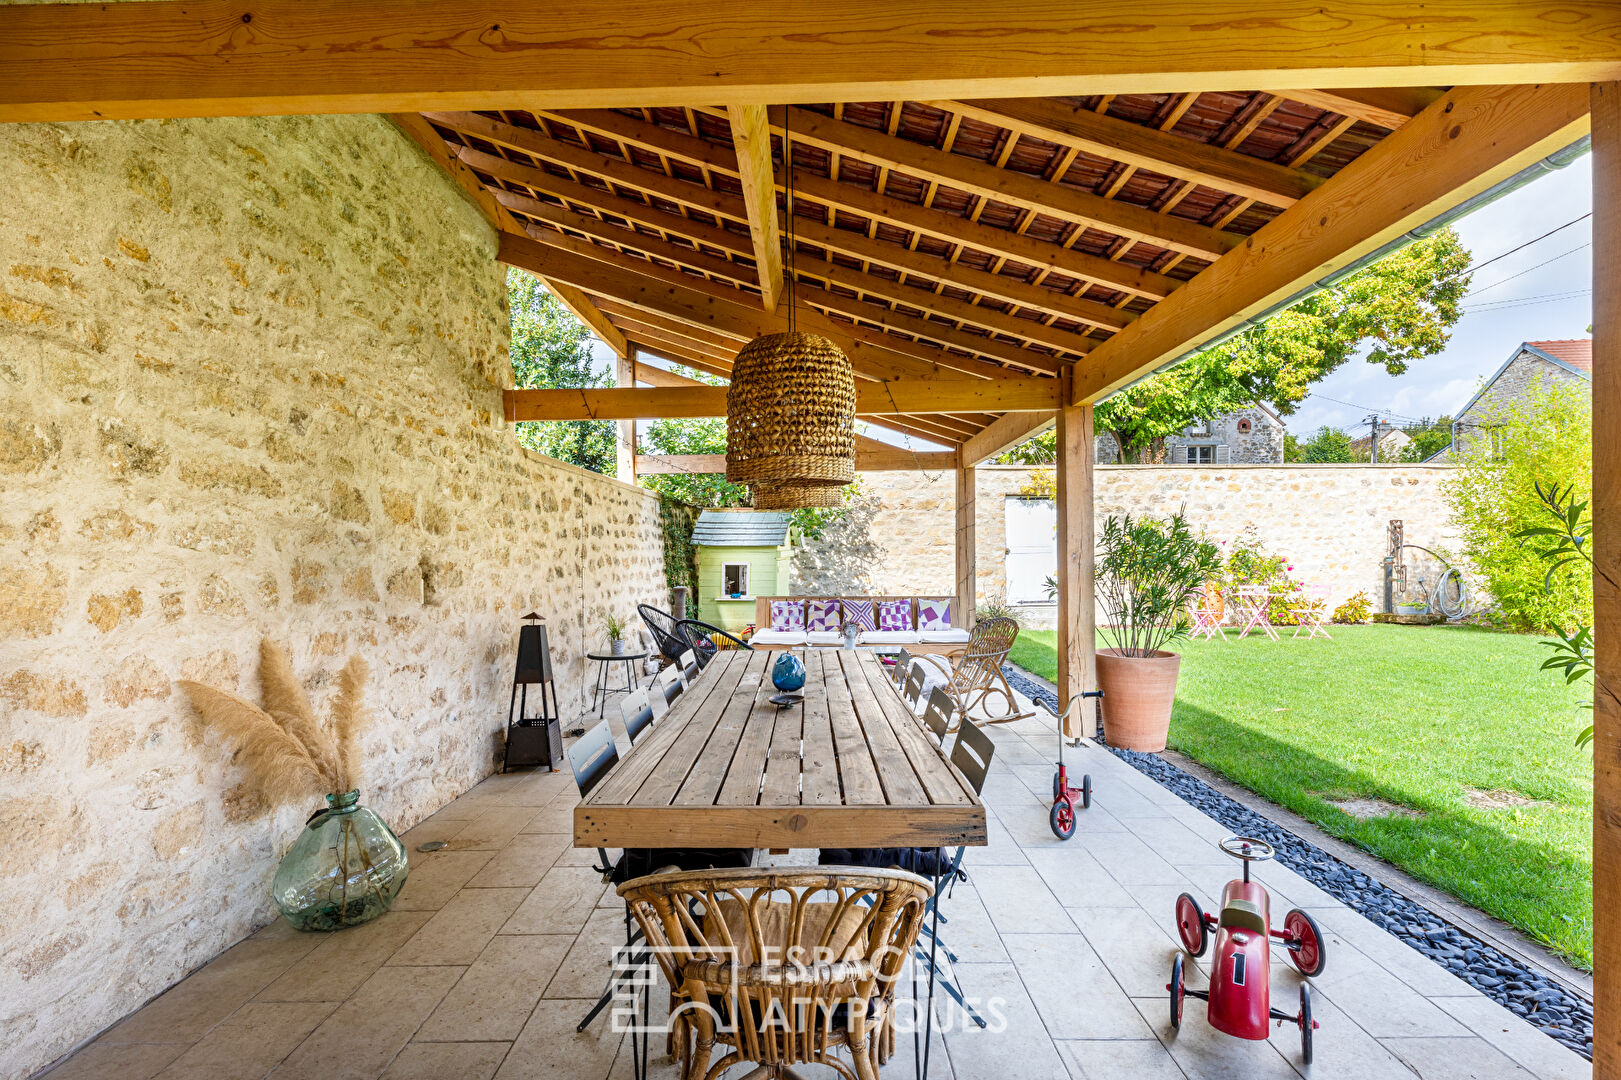 The house of happiness, its outbuilding and its summer kitchen